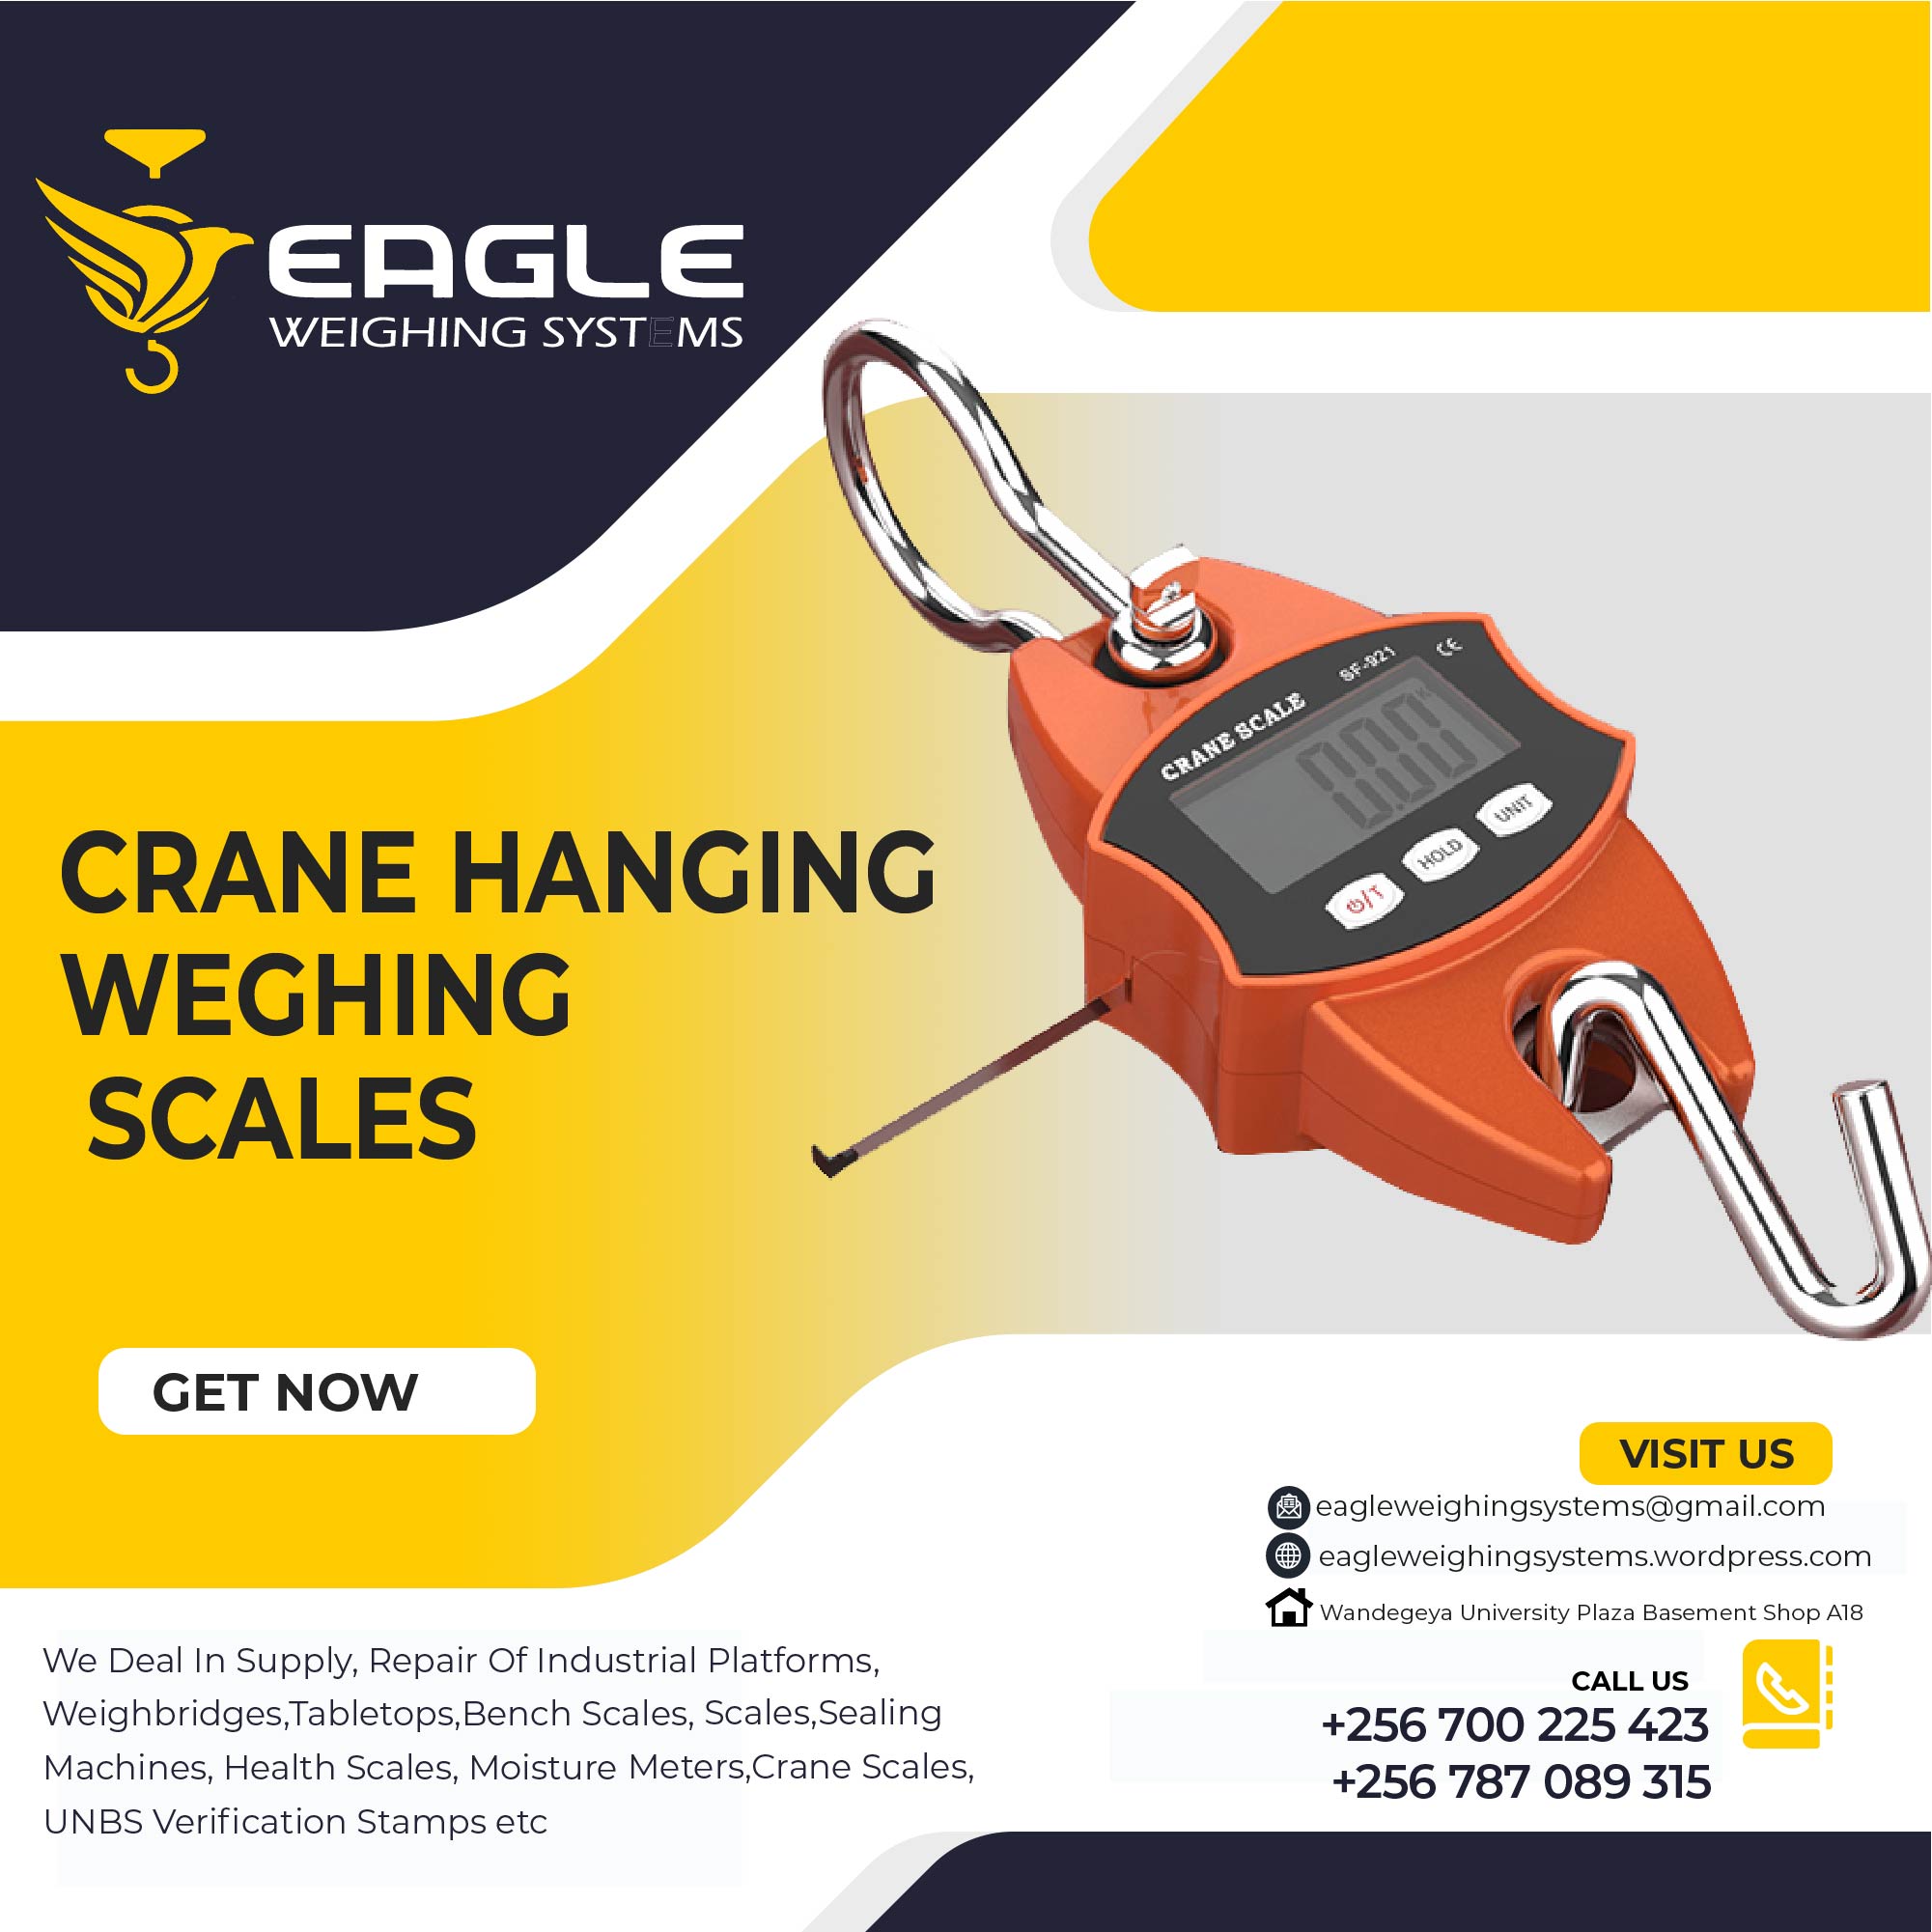 +256 (0) 787089315 Digital Crane Portable Electronic Weighing Scales, Kampala Central Division, Central, Uganda